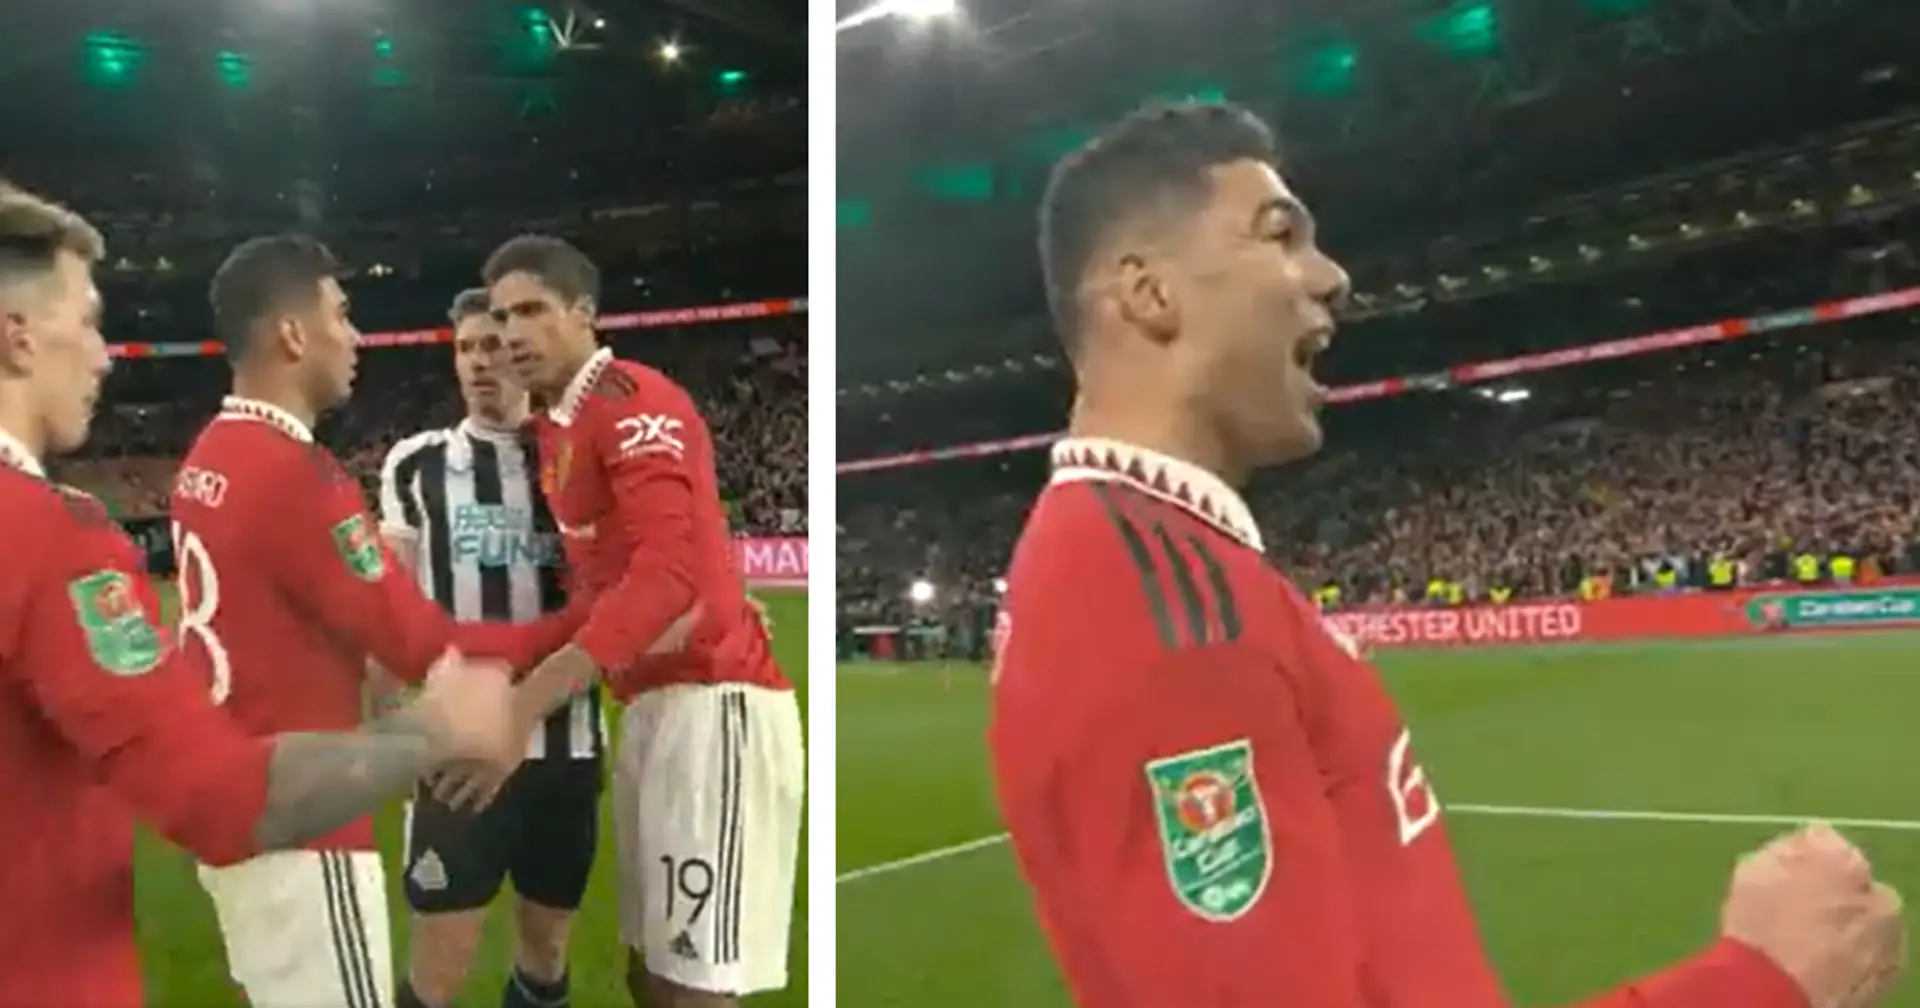 Spotted: Casemiro consoles Newcastle player at FT, then shrieks in delight